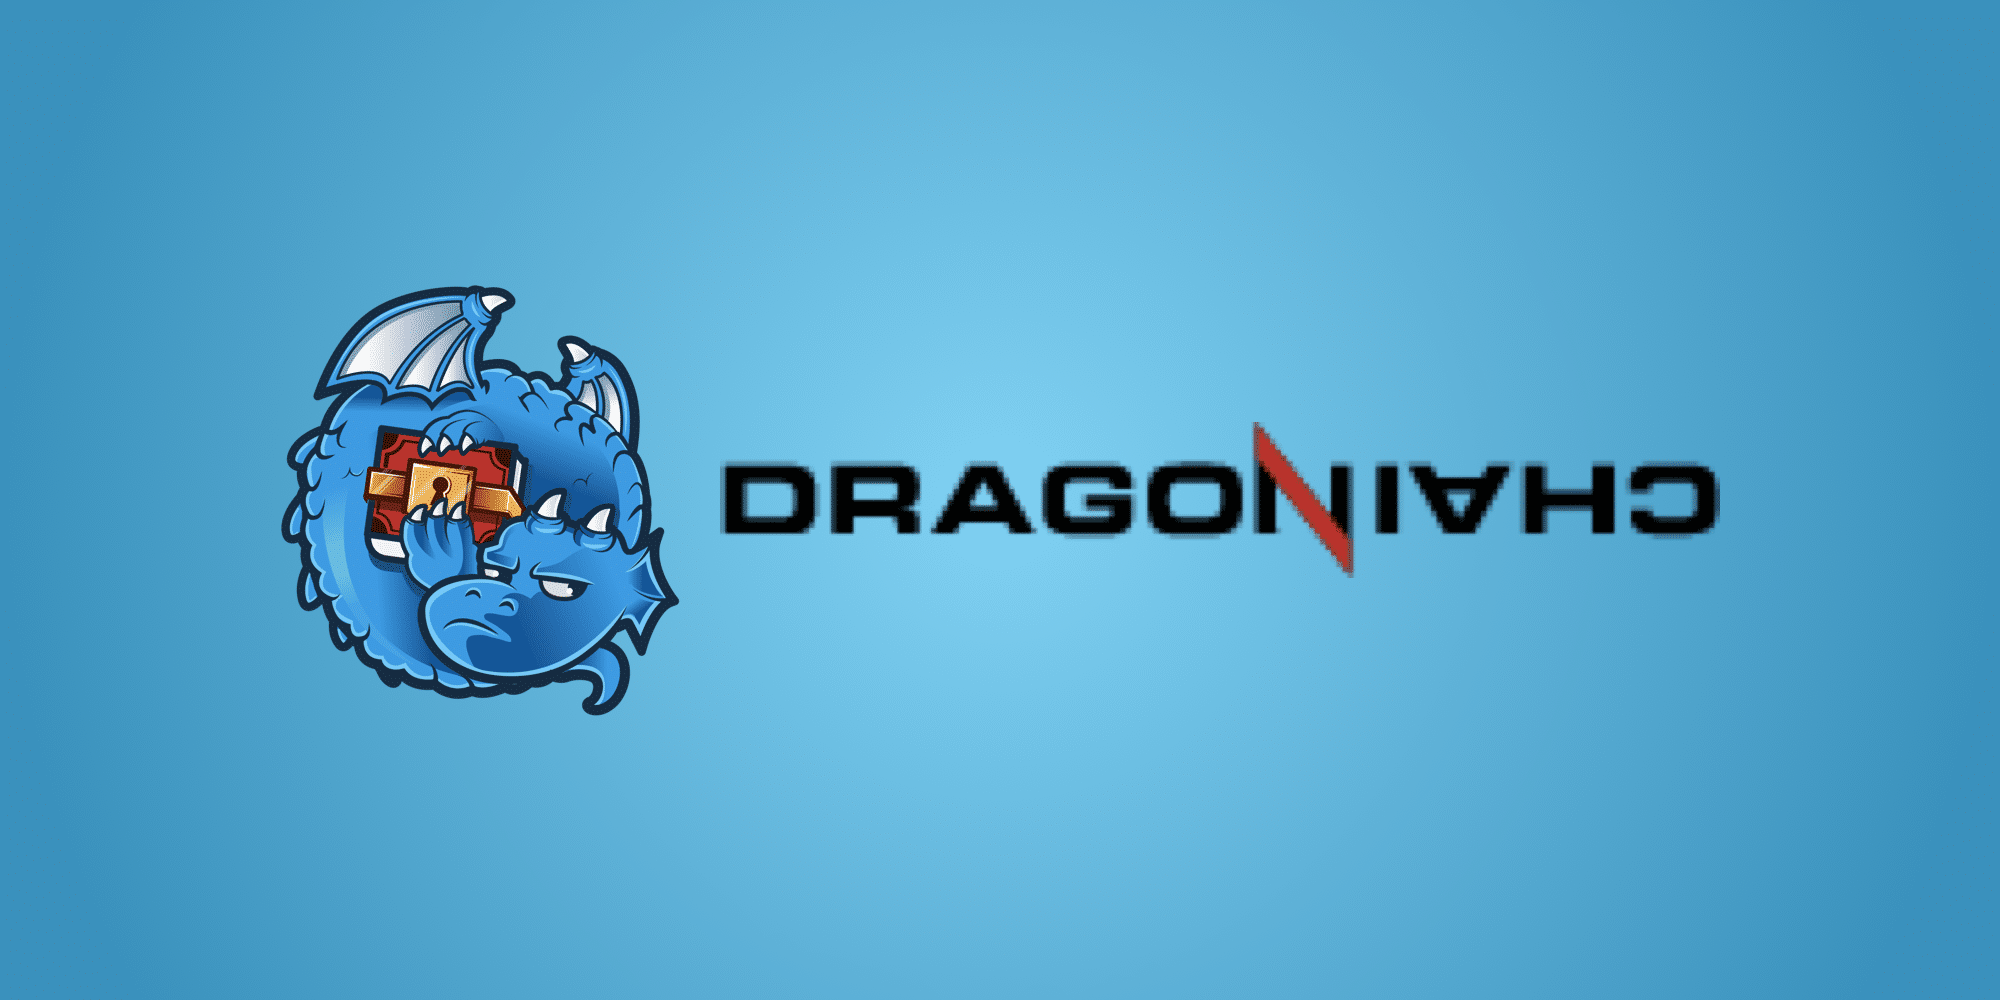 Dragonchain Price Today - DRGN to US dollar Live - Crypto | Coinranking